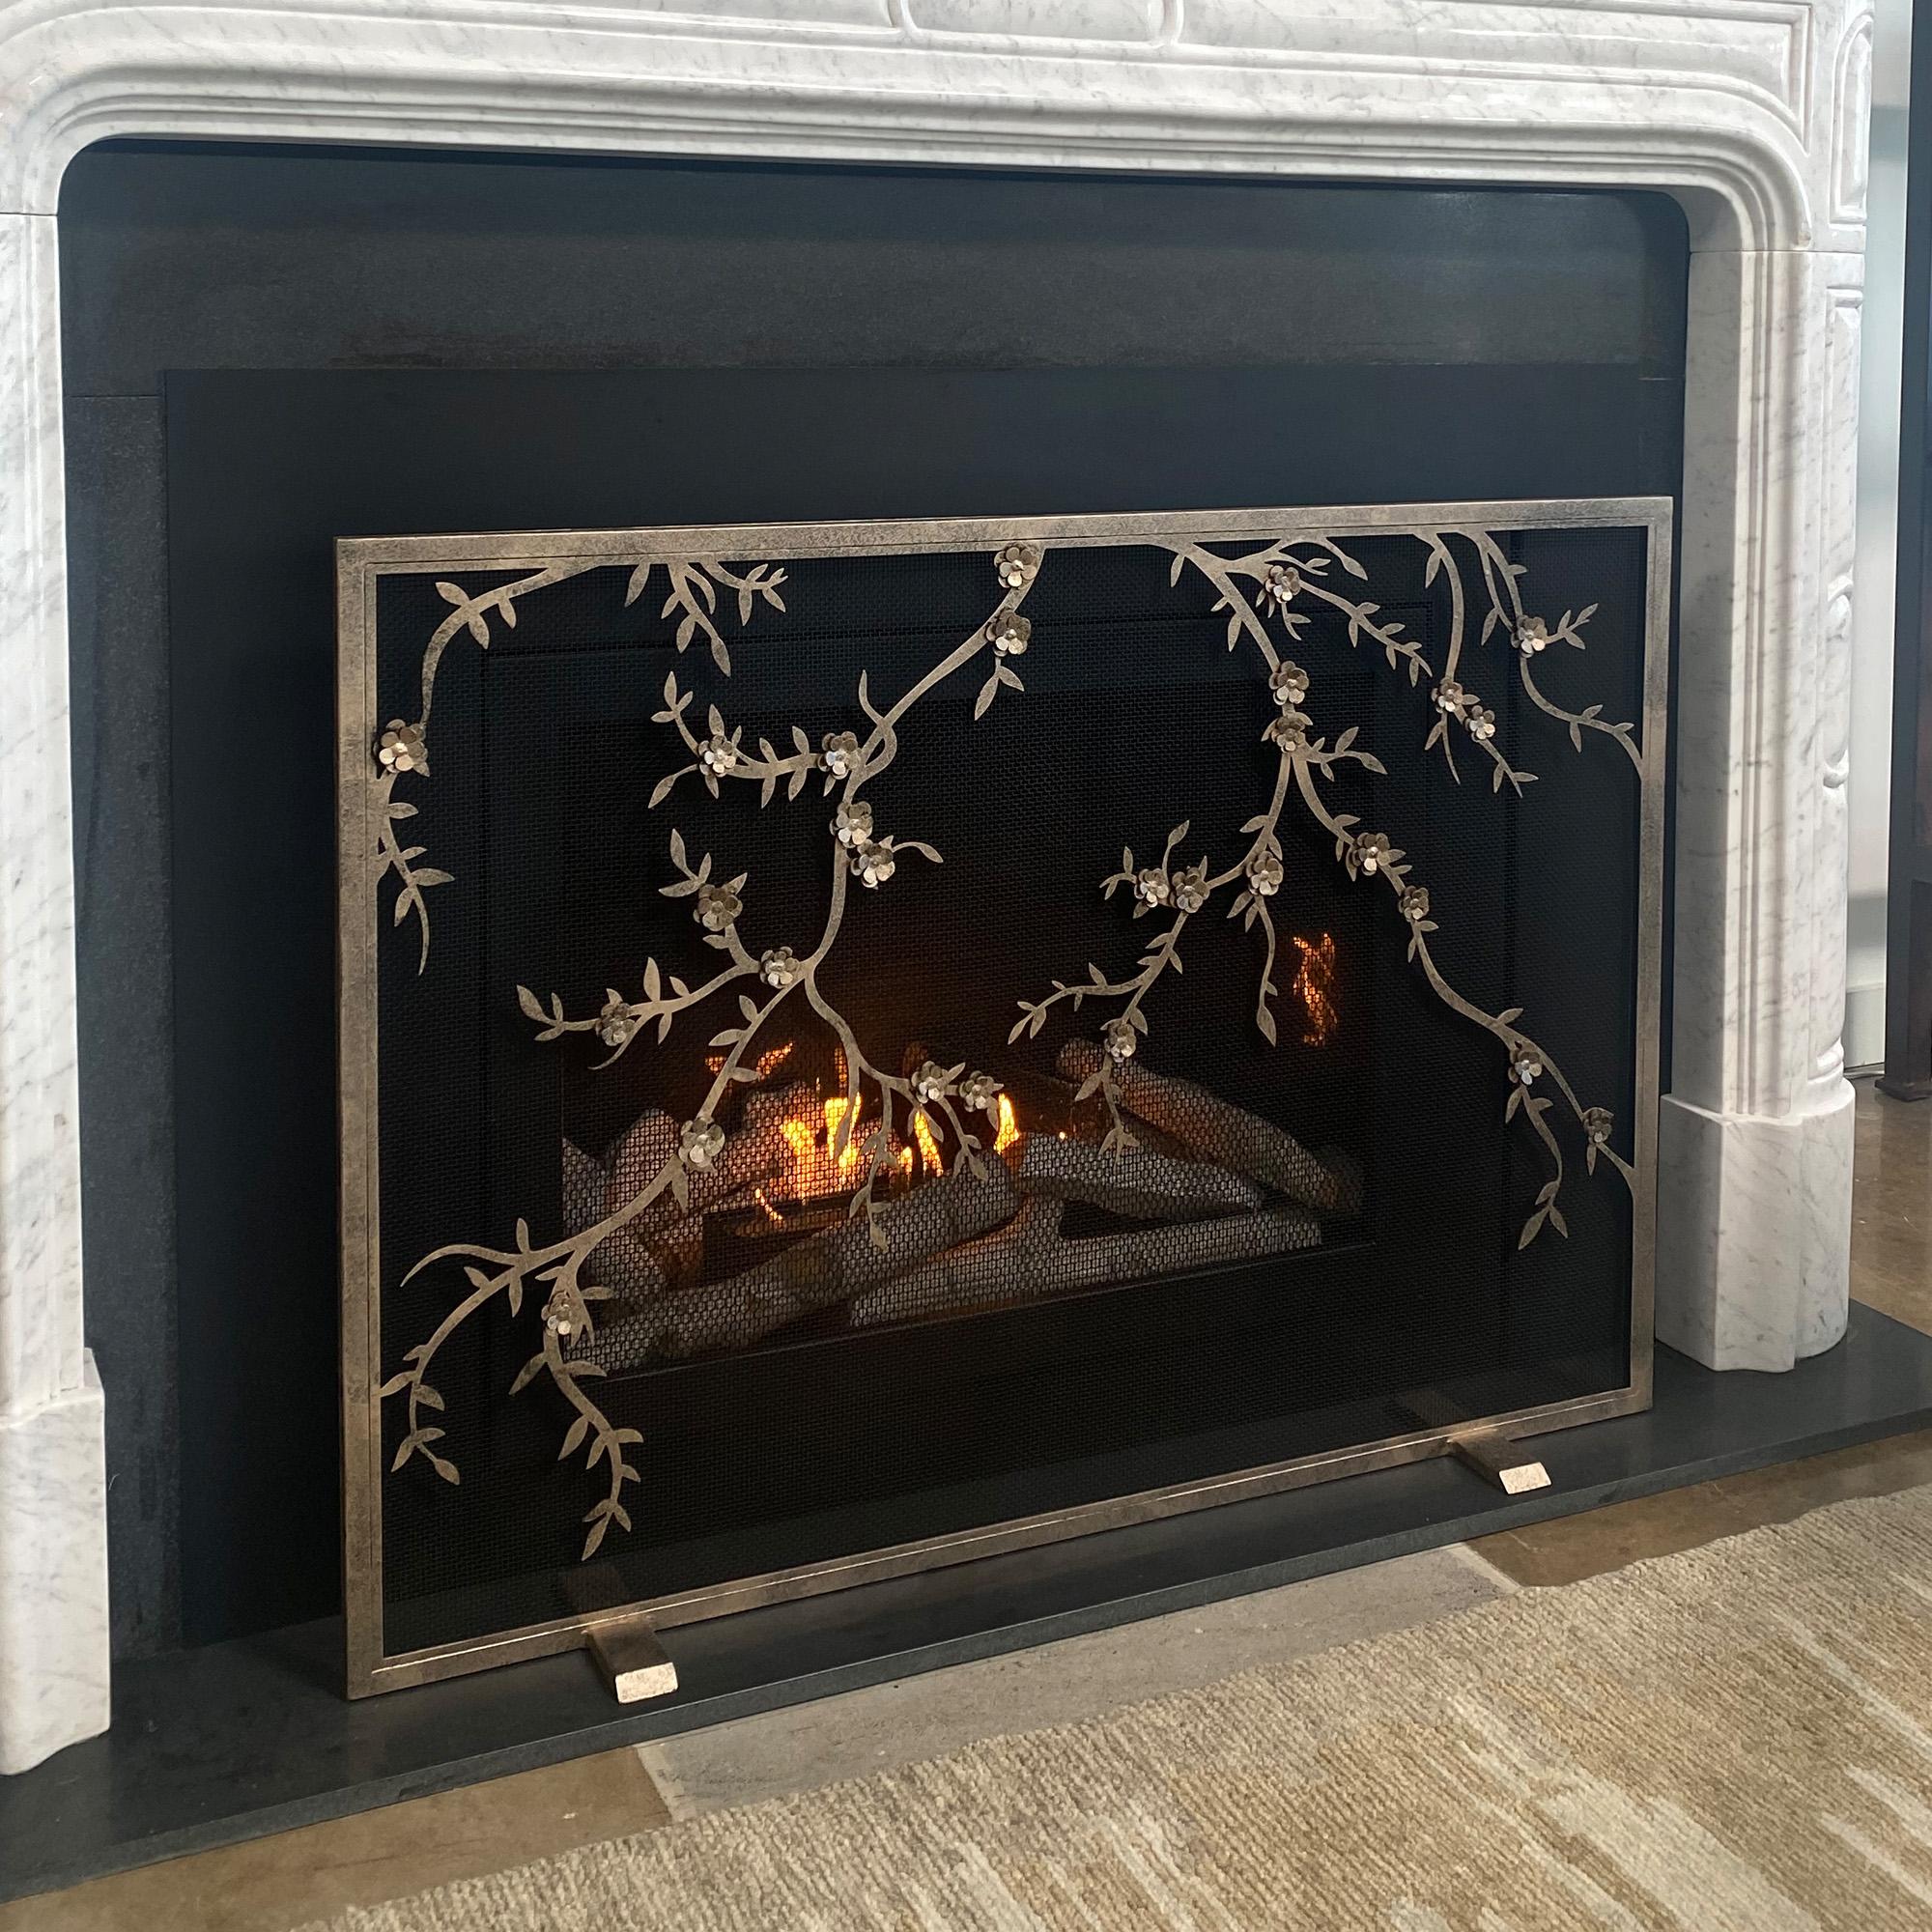 Introducing the Plum Blossom fireplace screen – an eye-catching design that combines the beauty of nature with the warmth of the hearth. Each made to order screen combines silhouetted branches with layered petals to create a playful and delicate